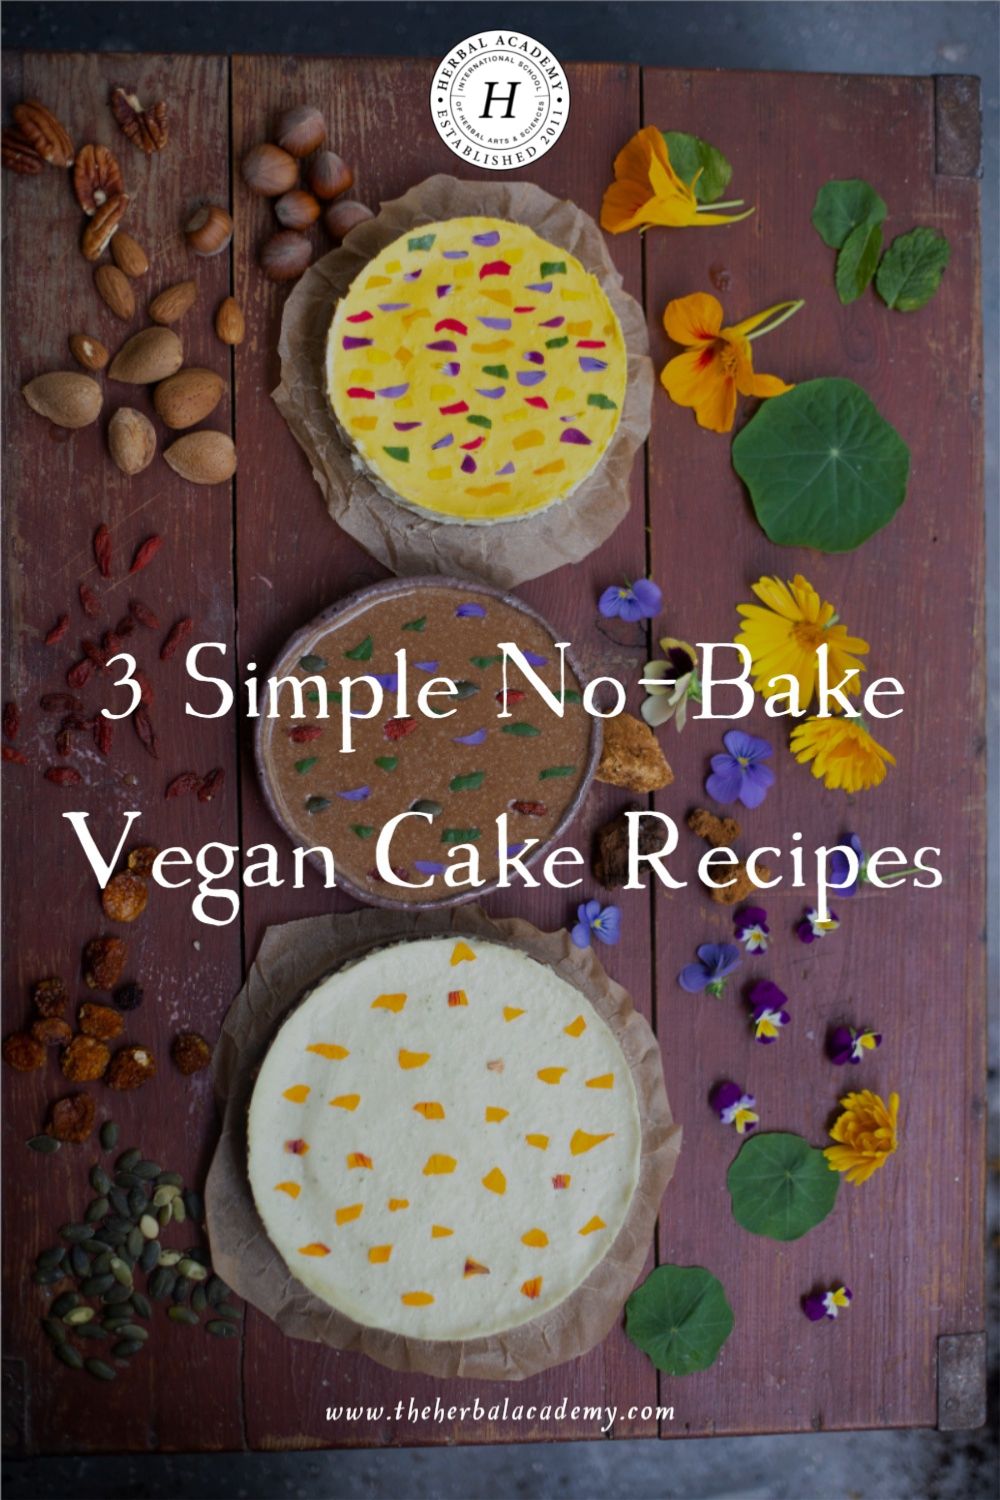 3 Simple No-Bake Vegan Cake Recipes | Herbal Academy | In this post, we share three recipes for gluten-free, dairy-free no-bake vegan cake recipes: mango banana, raw cocoa, and lemon coconut.